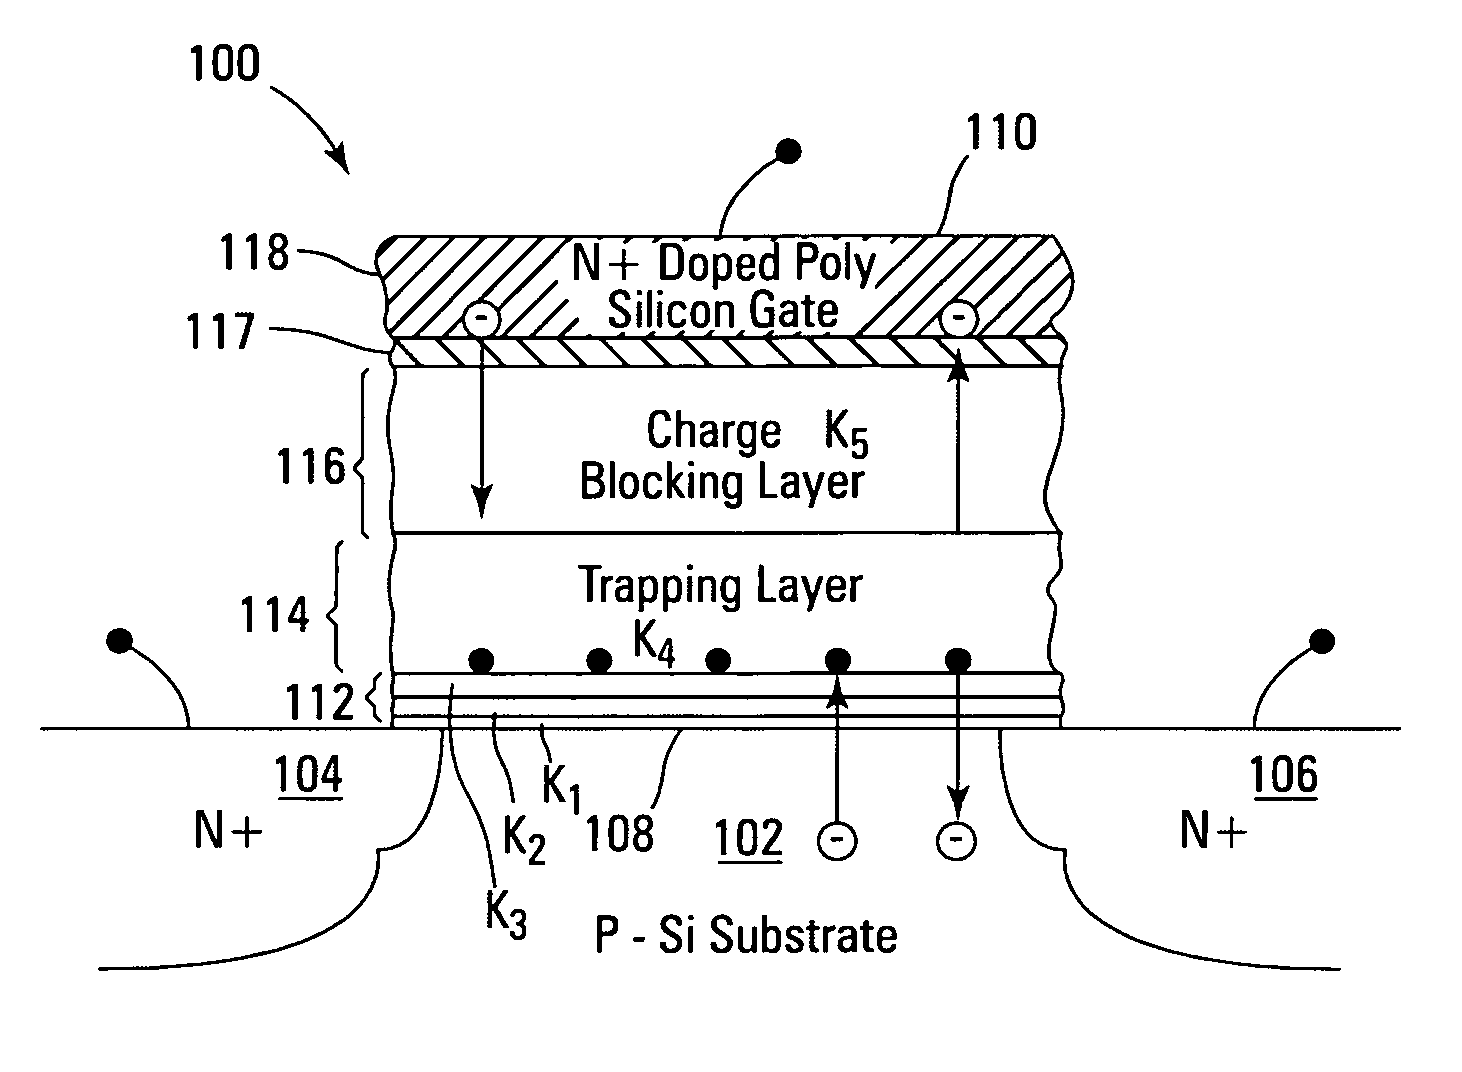 Novel low power non-volatile memory and gate stack